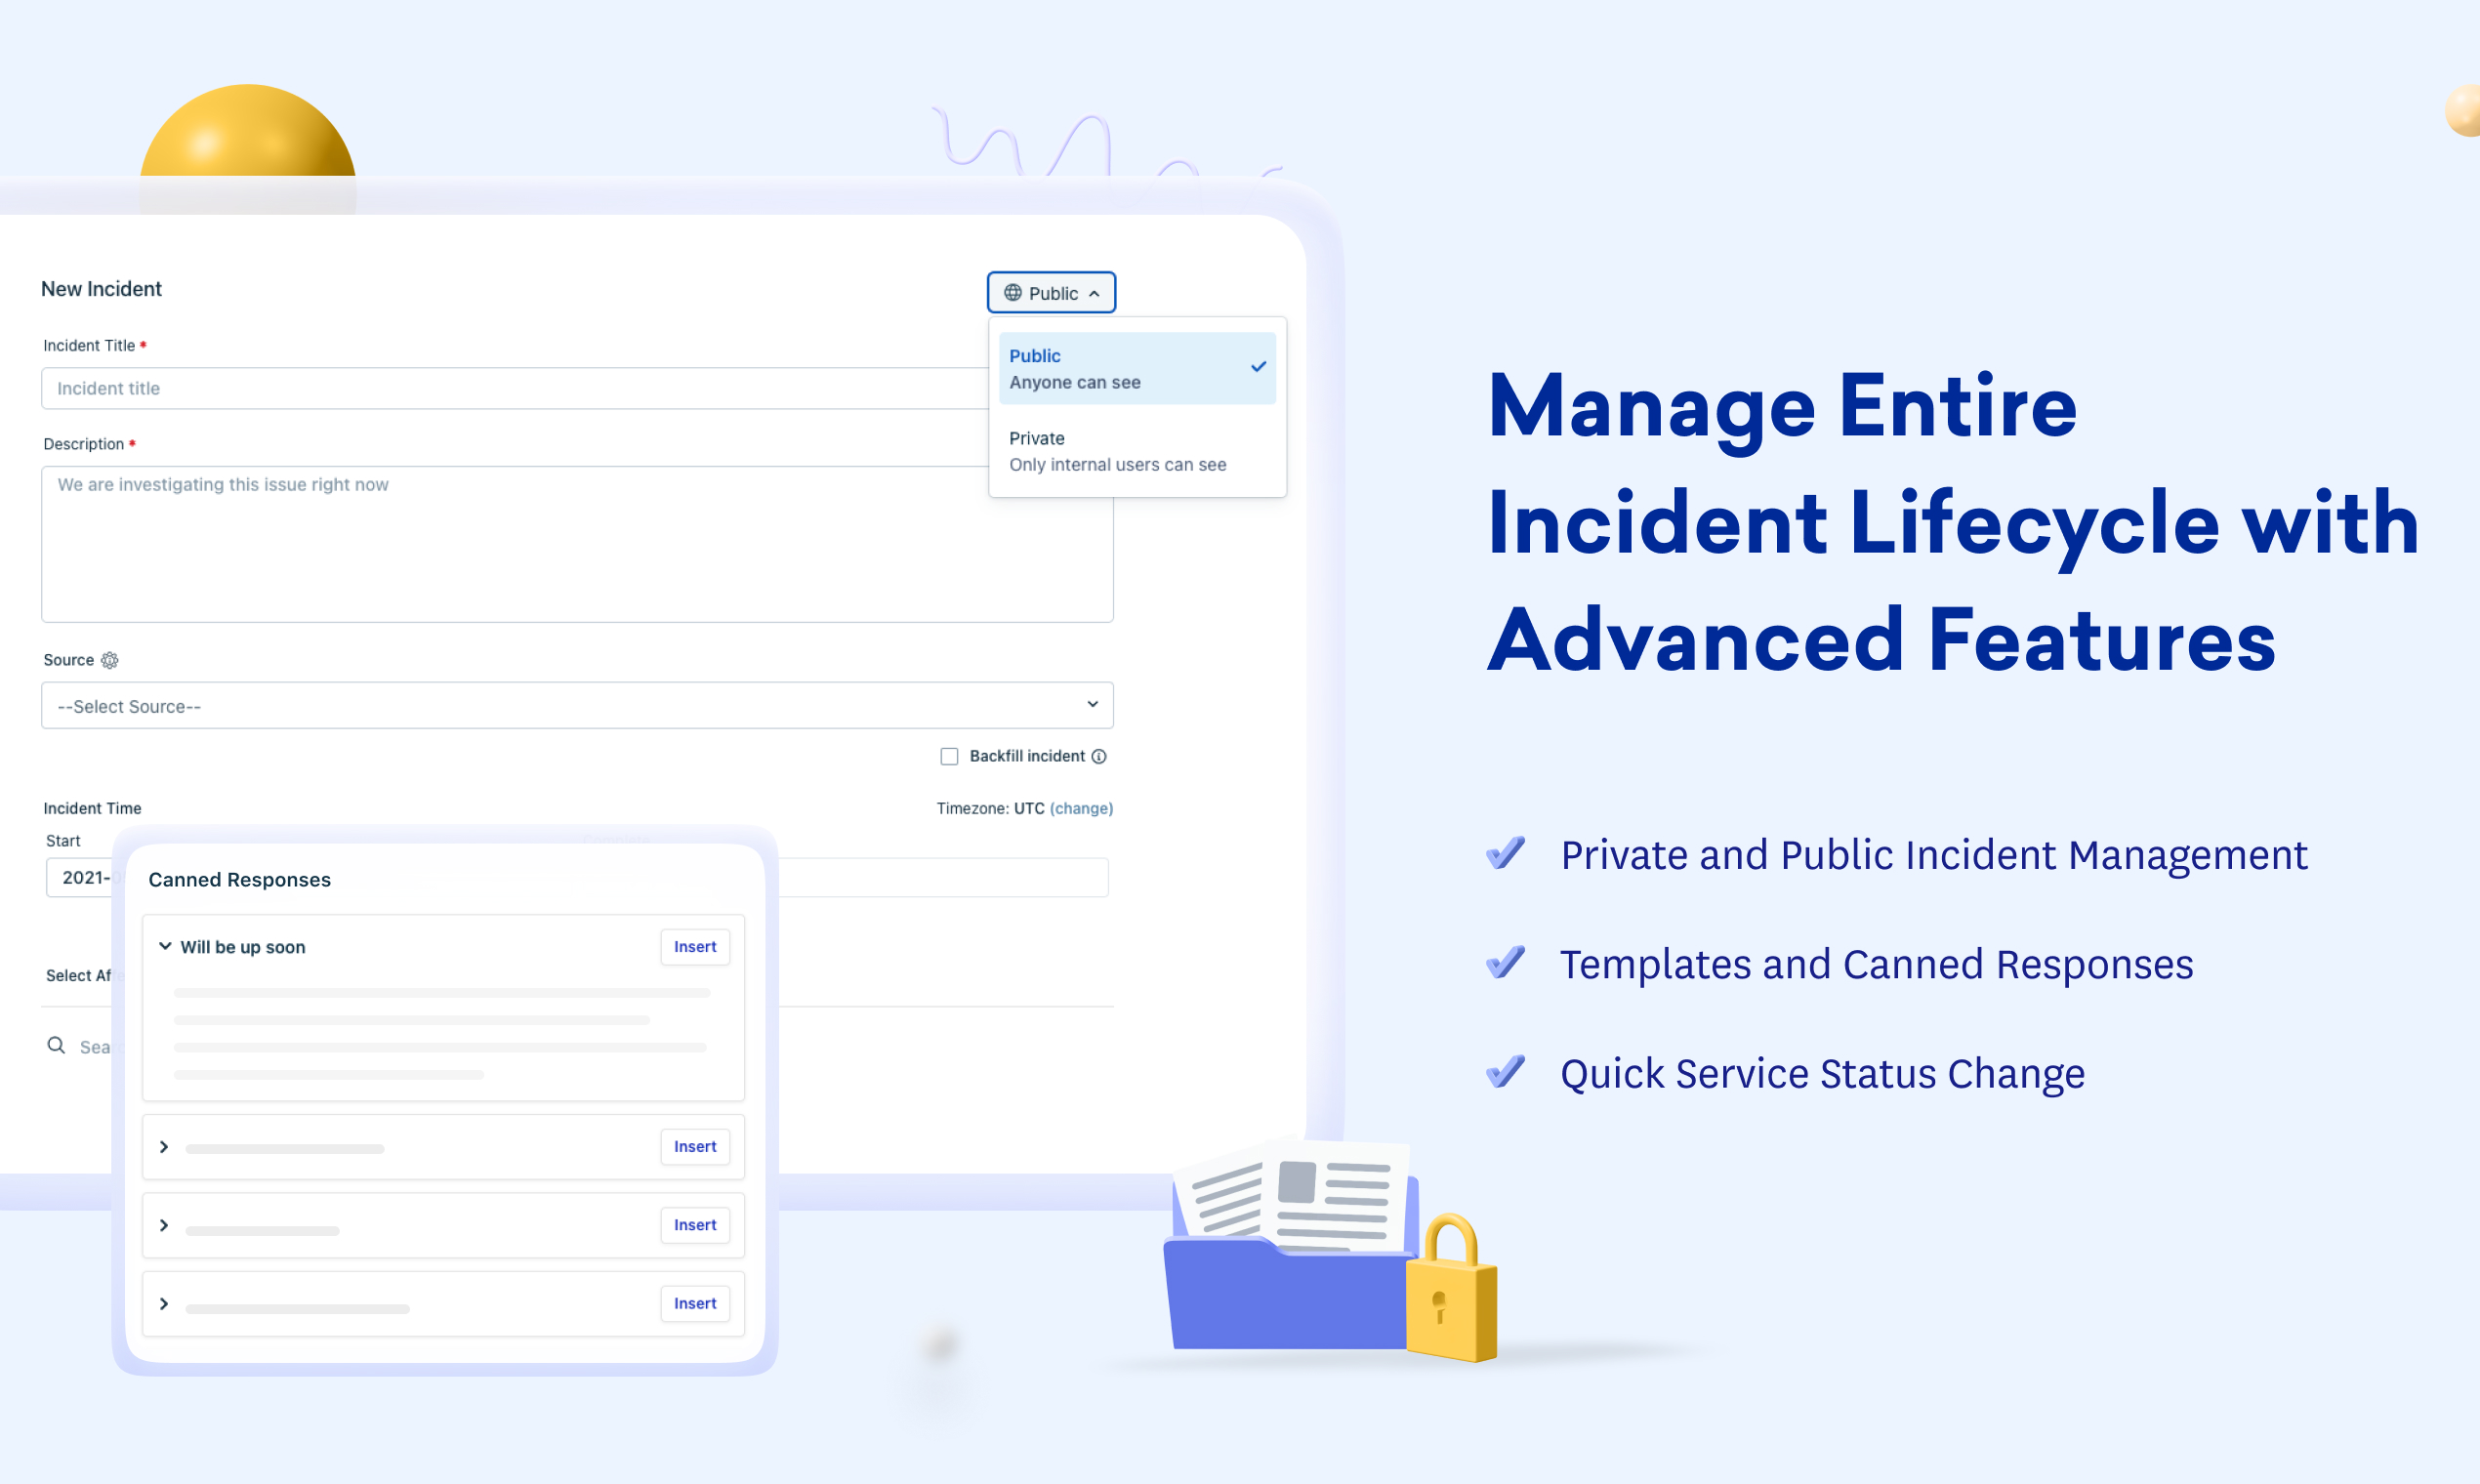 Manage entire Incident Lifecycle with advanced features